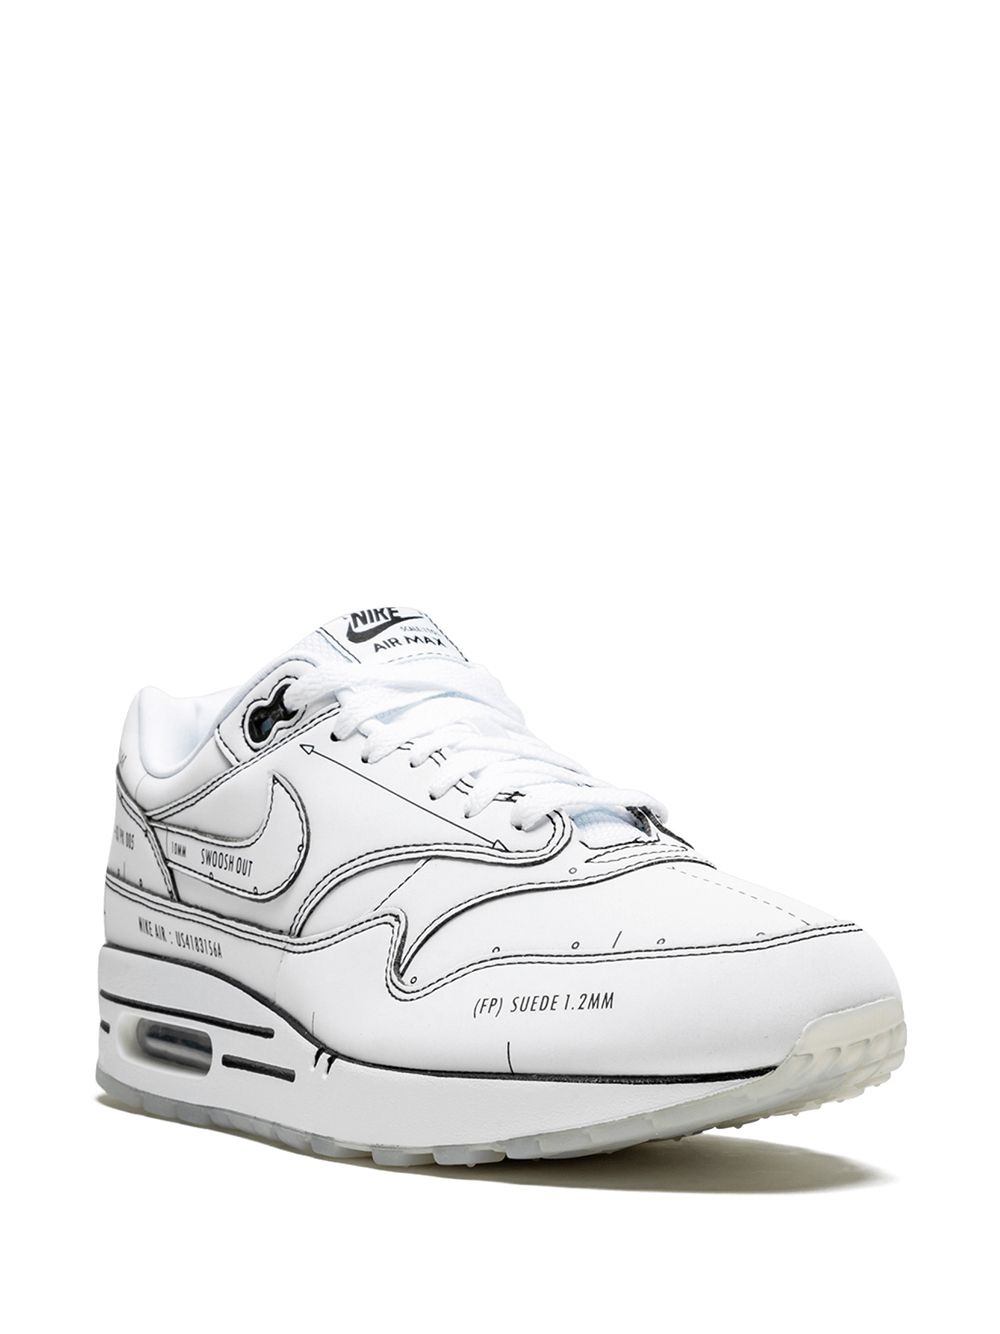 Air Max 1 "Sketch Schematic" sneakers - 2